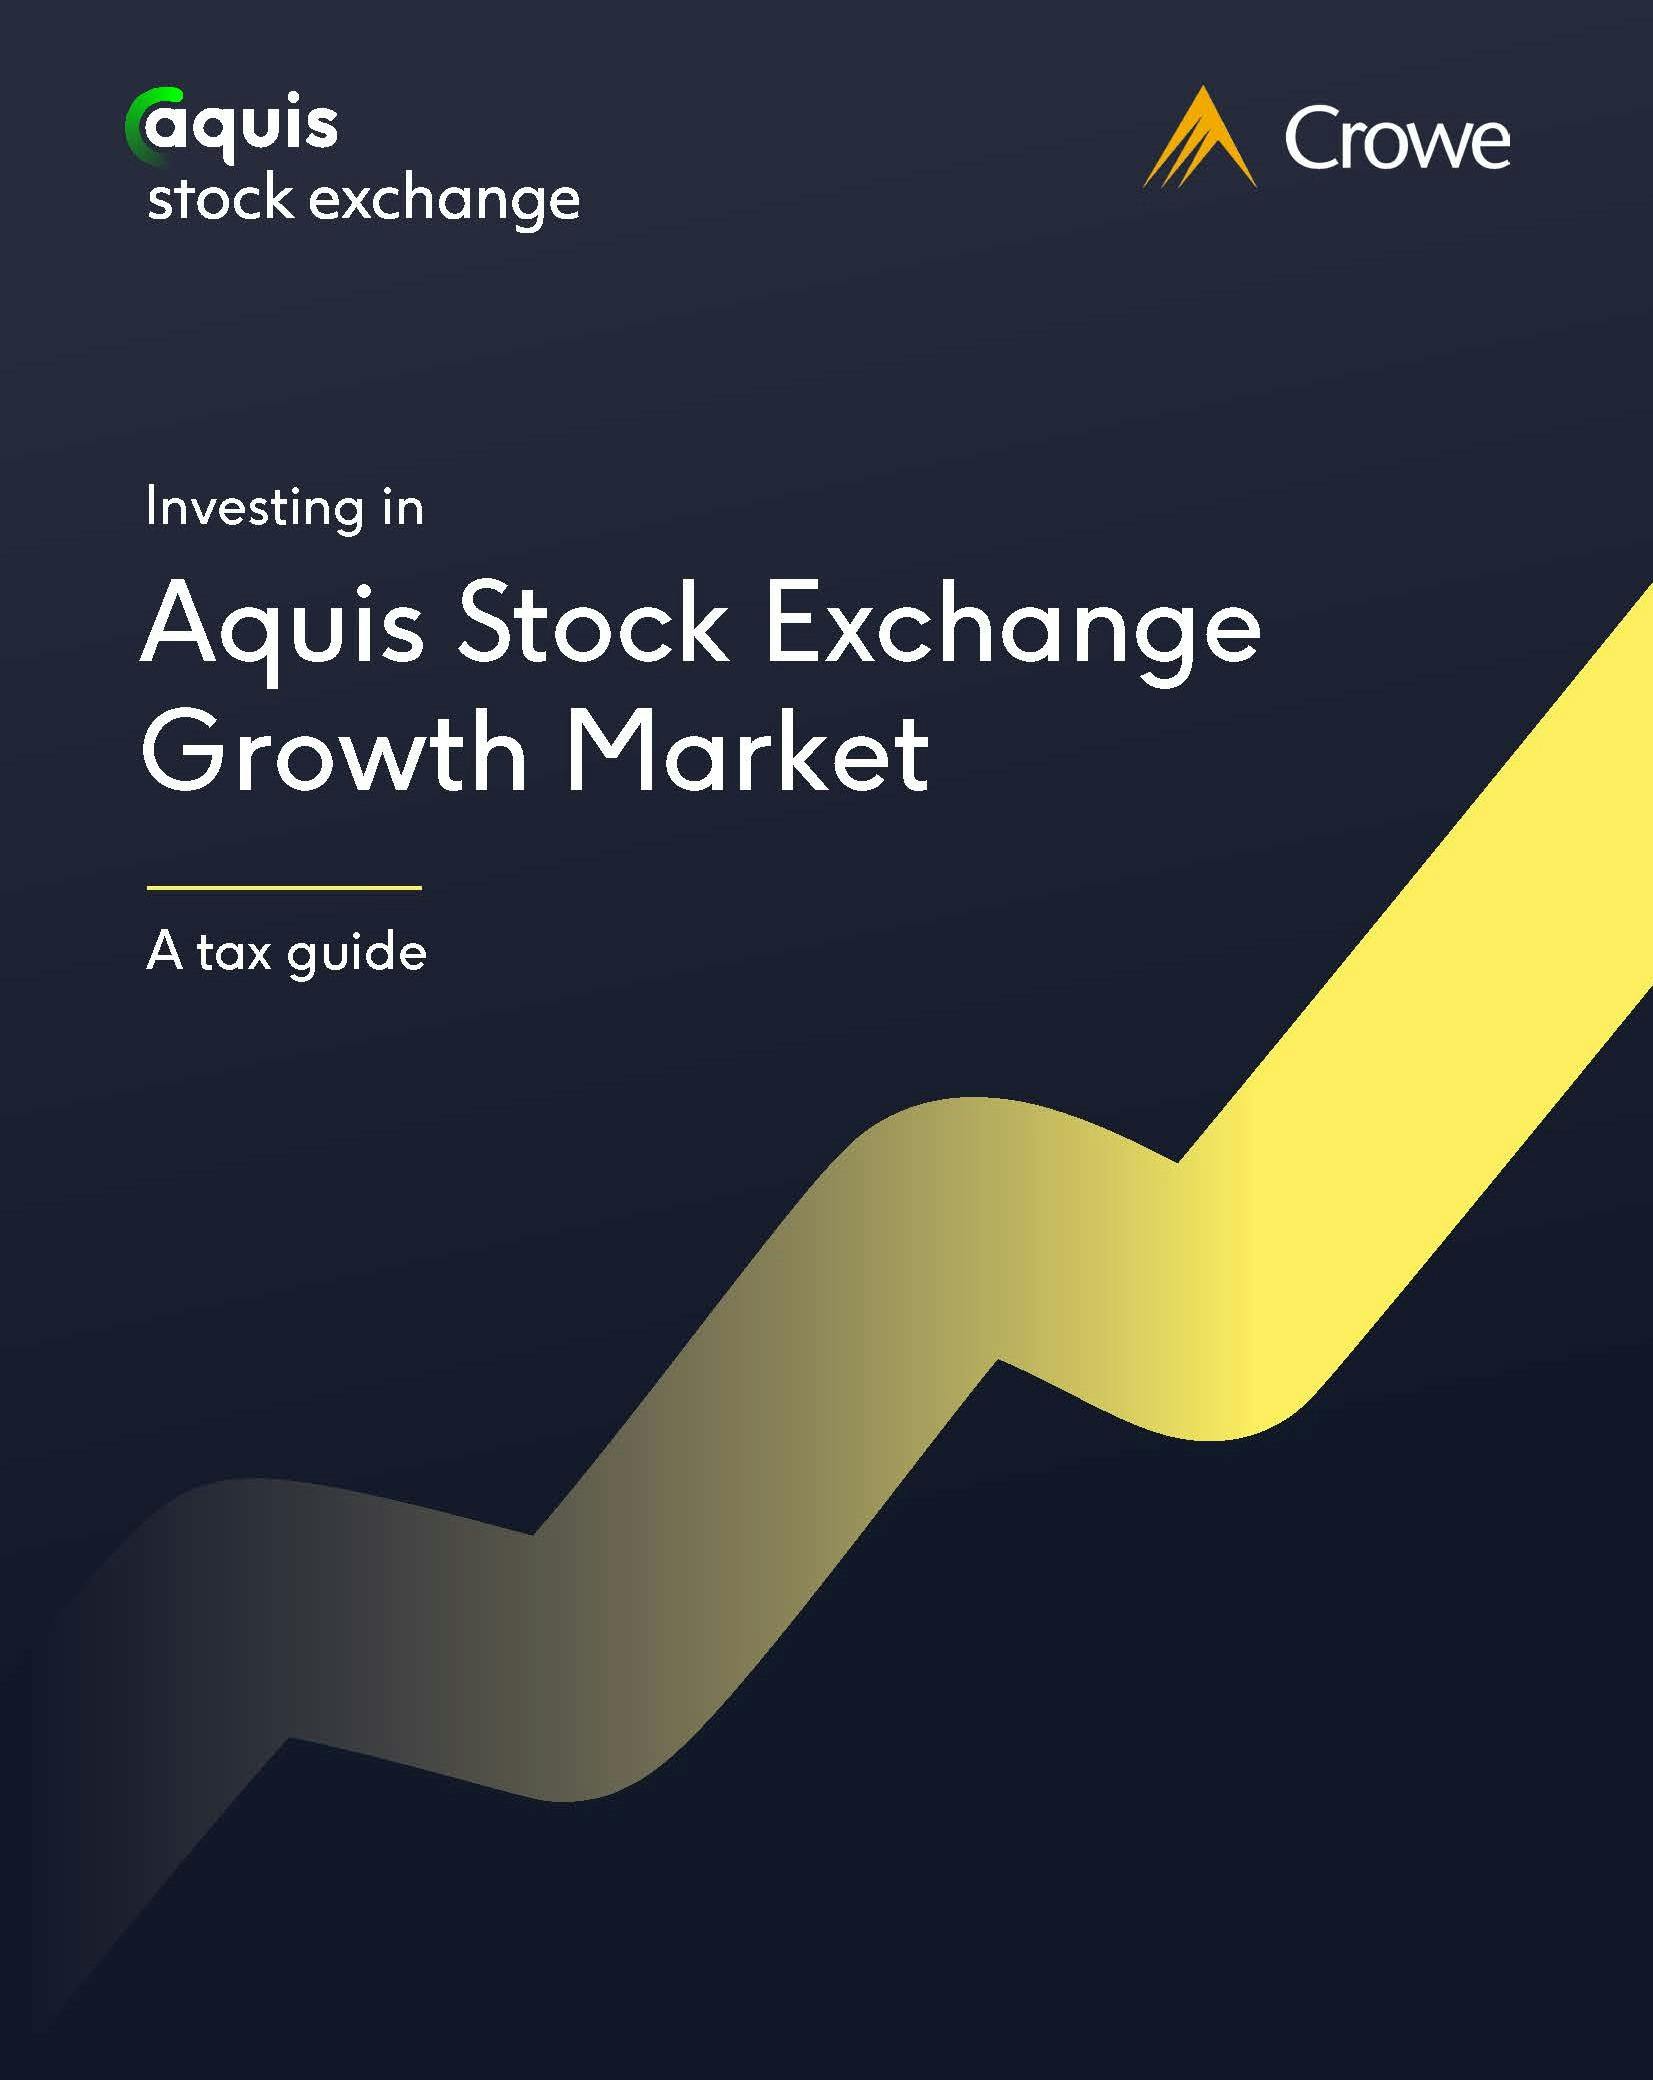 Aquis Growth Market - are you making the most of the tax incentives available?